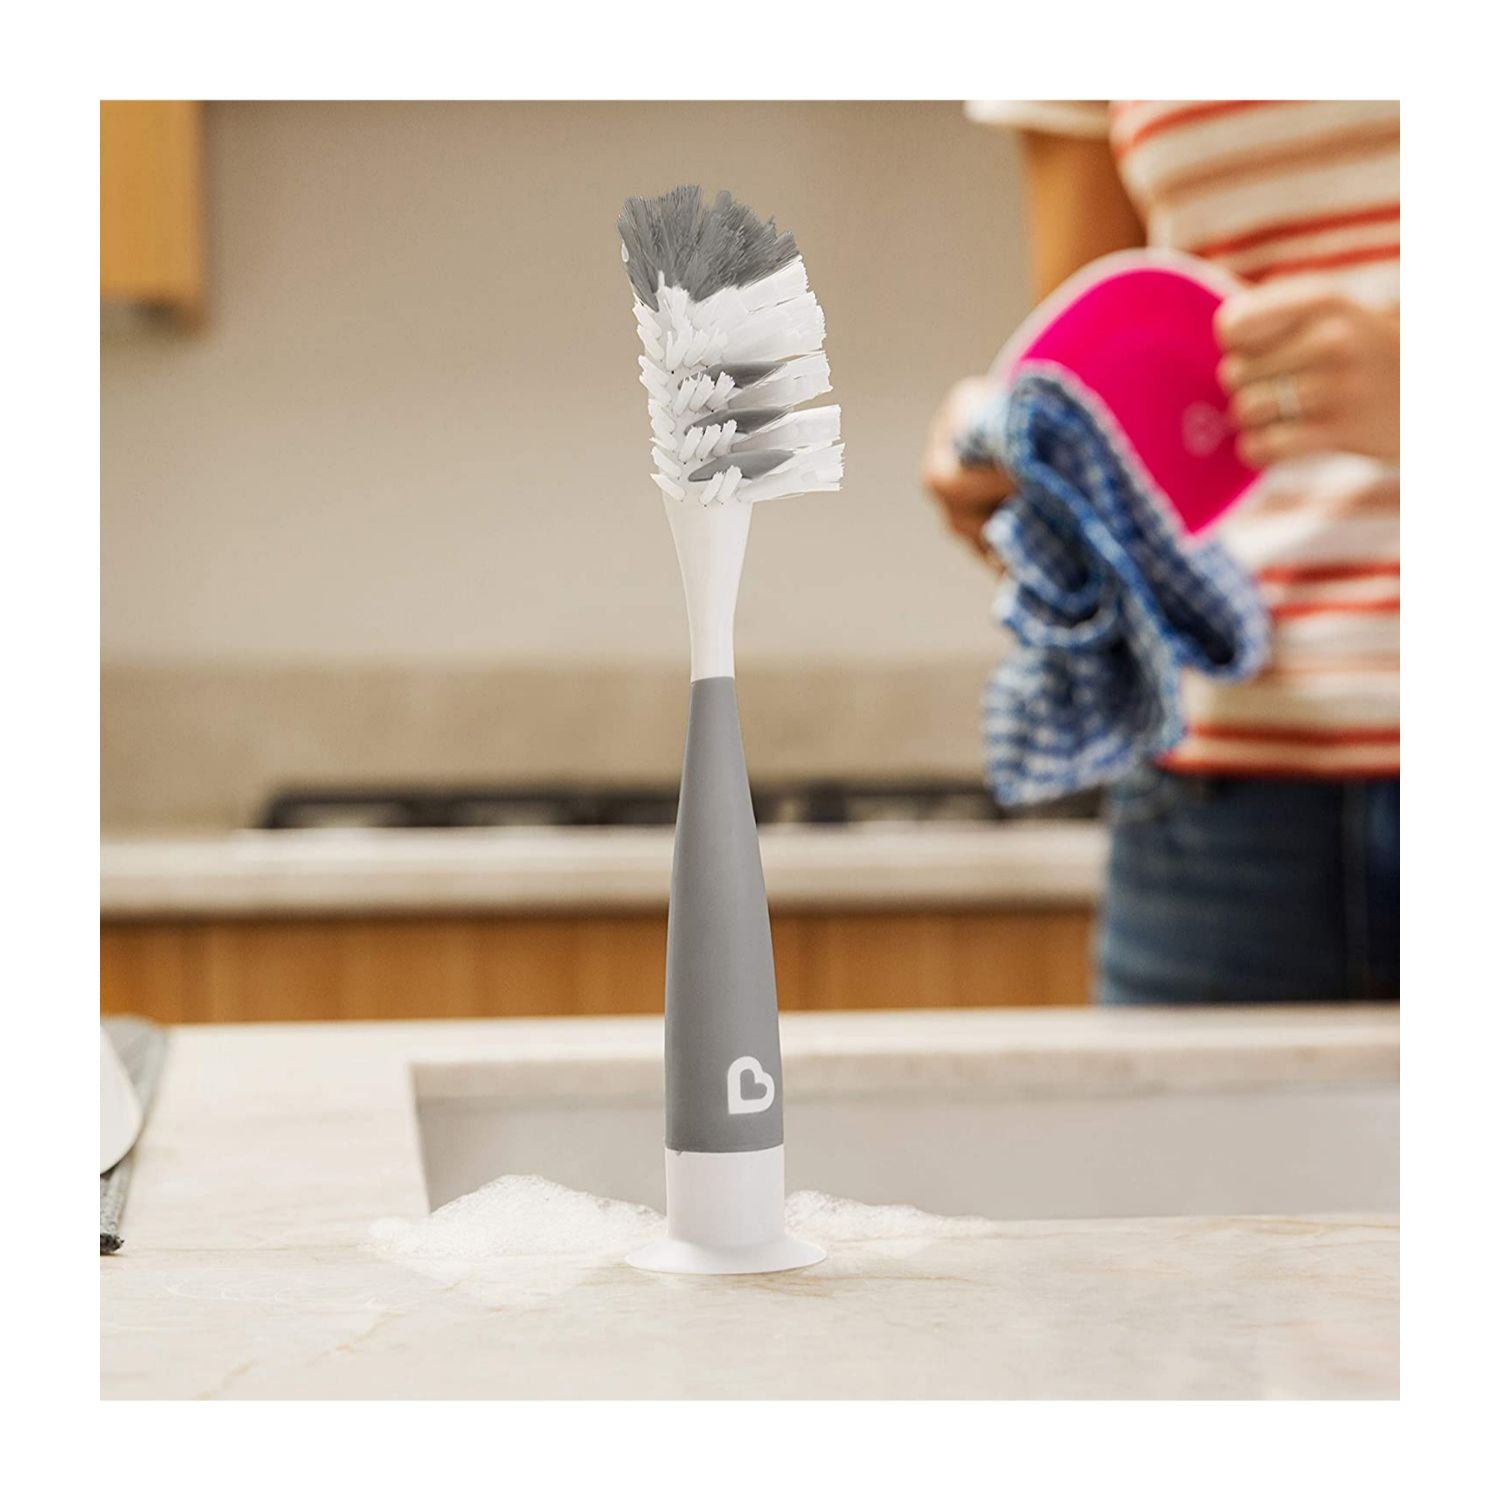 Munchkin Dual Sided Cup and Baby Bottle Brush, Includes Straw Brush, Grey